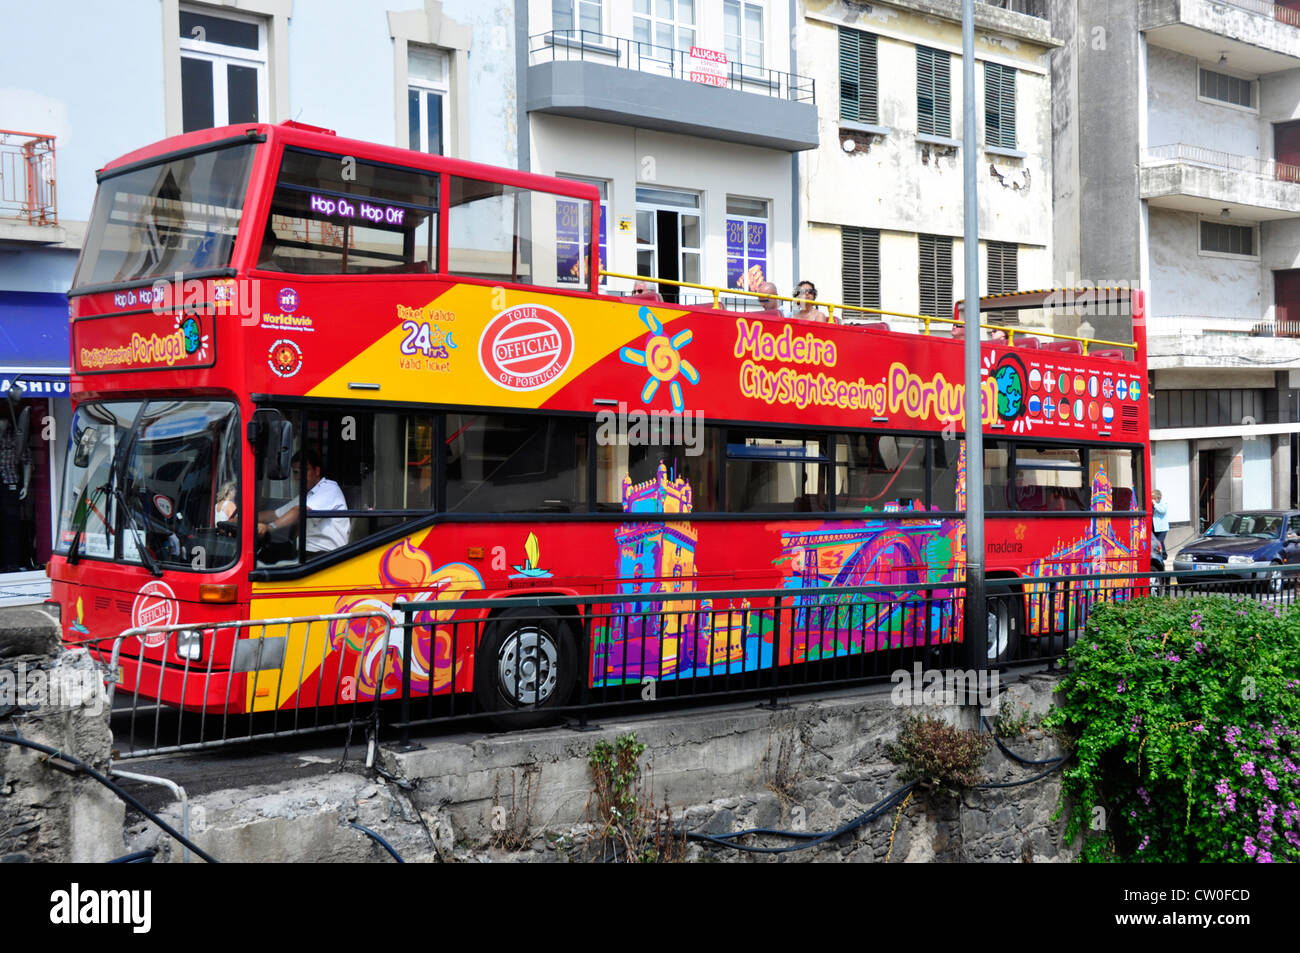 Portugal - Madeira island - Funchal town - distinctive red open top bus  offering local tours - similar to buses seen in London Stock Photo - Alamy